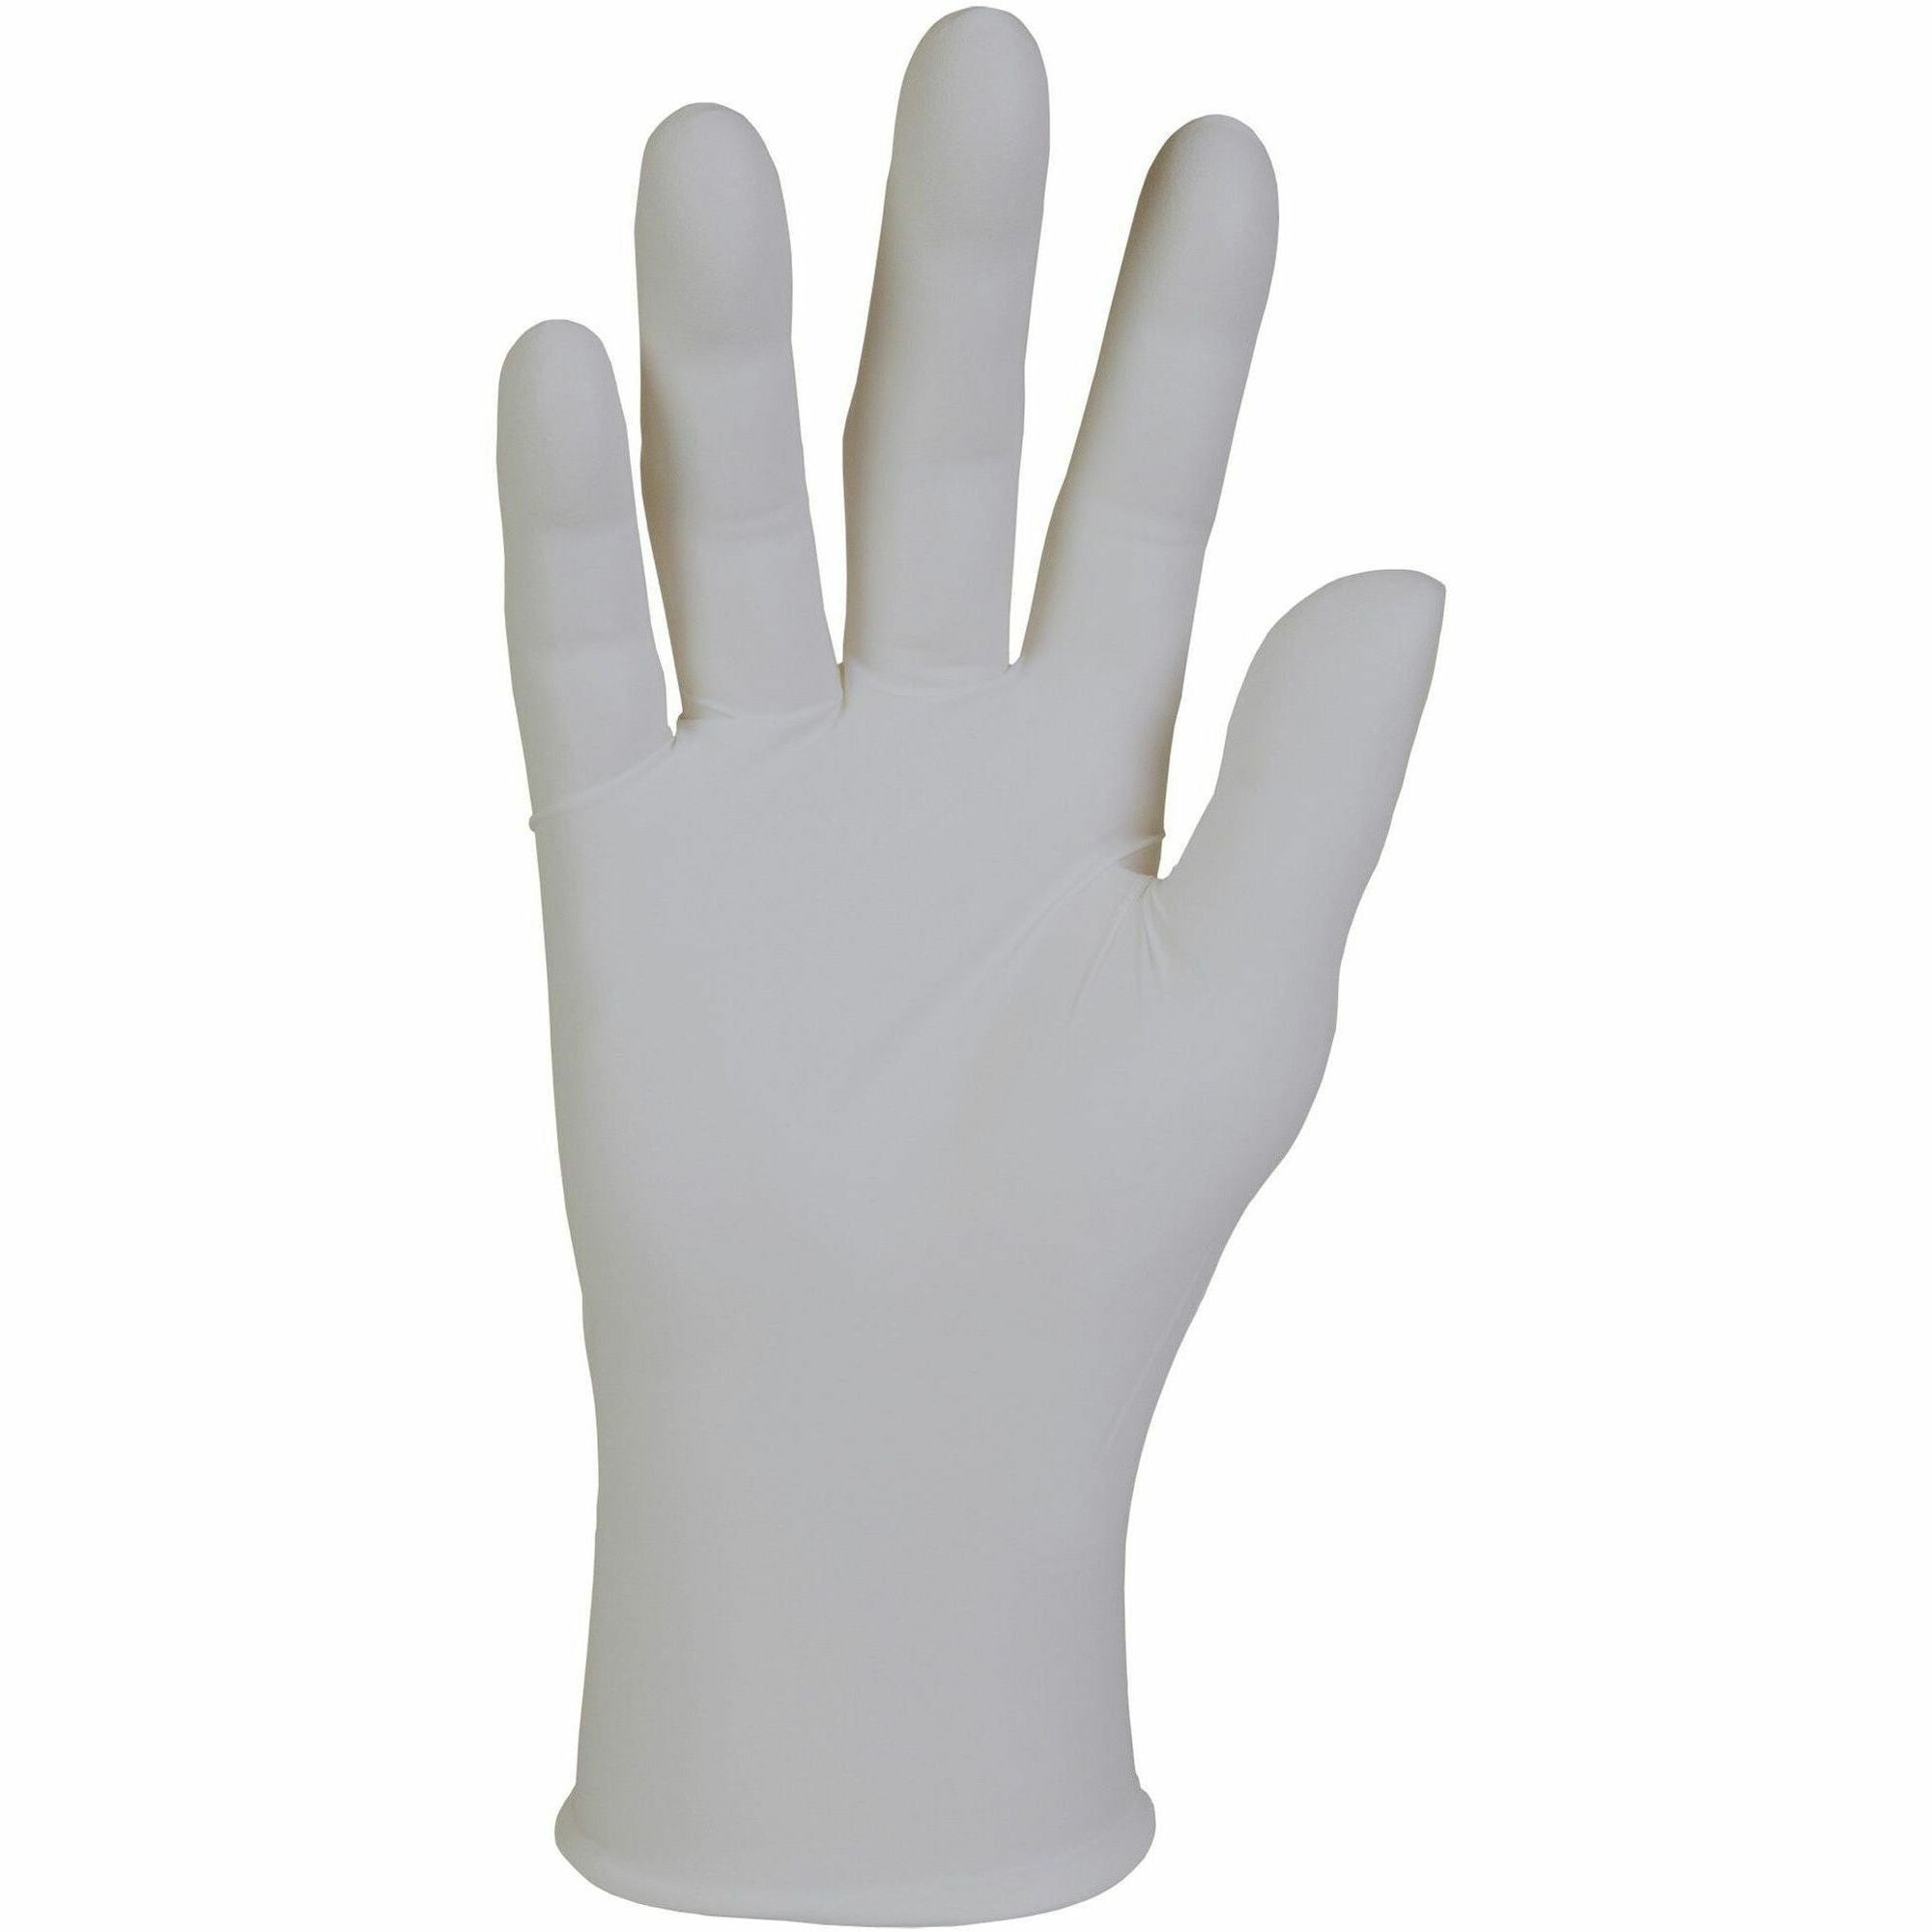 kimberly-clark-professional-sterling-nitrile-exam-gloves_kcc50708ct - 1